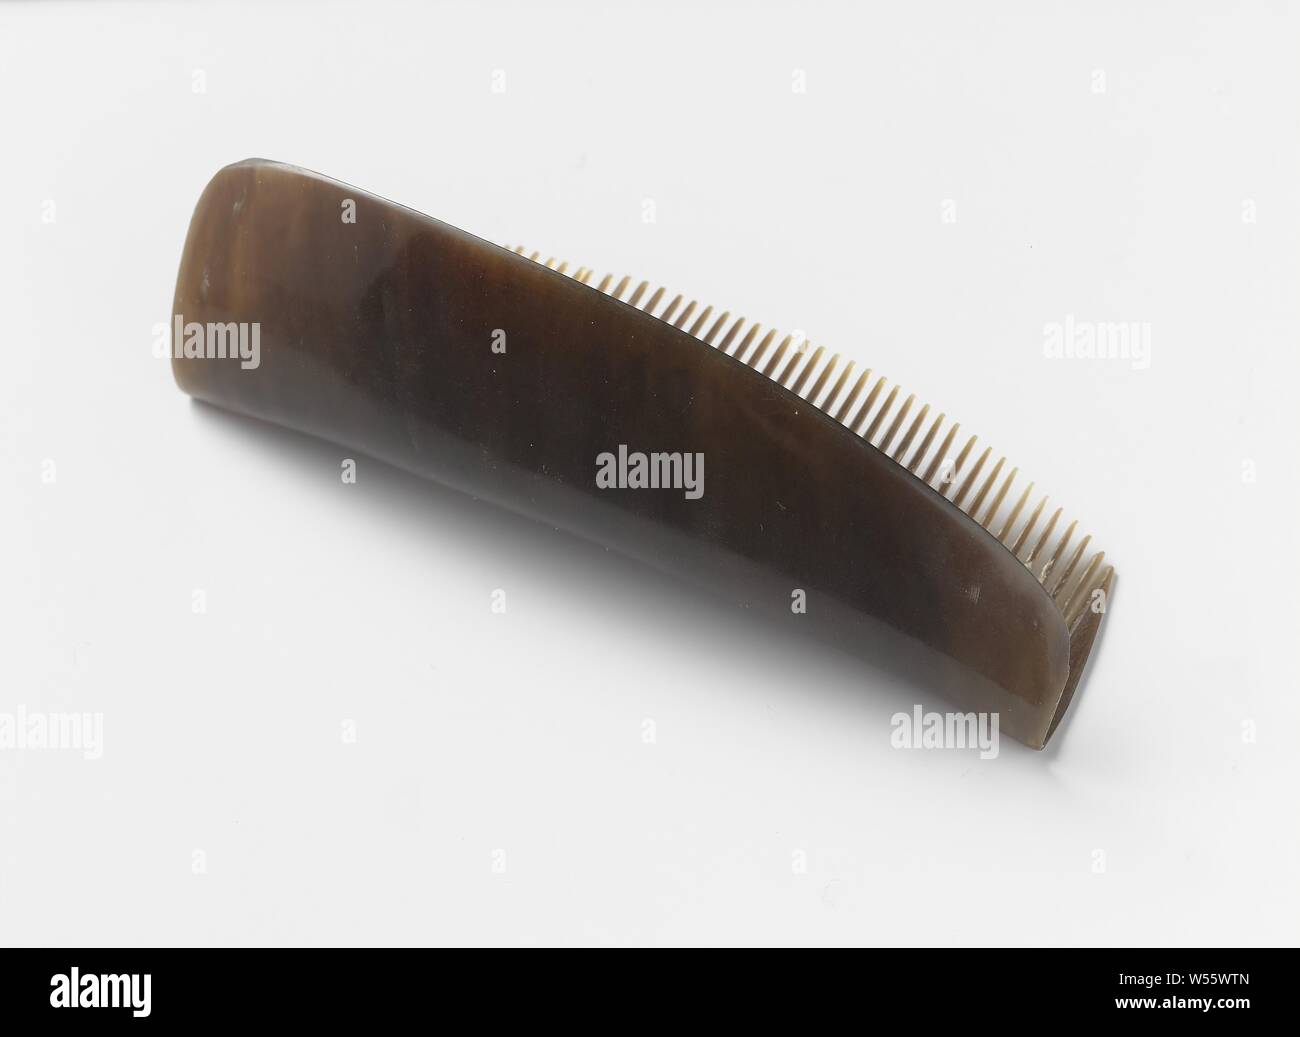 Hair comb of tortoise and horn with an unadorned tapered back that is  perpendicular to the teeth, Hair comb of tortoise and horn with an  undecorated tapered back that is perpendicular to